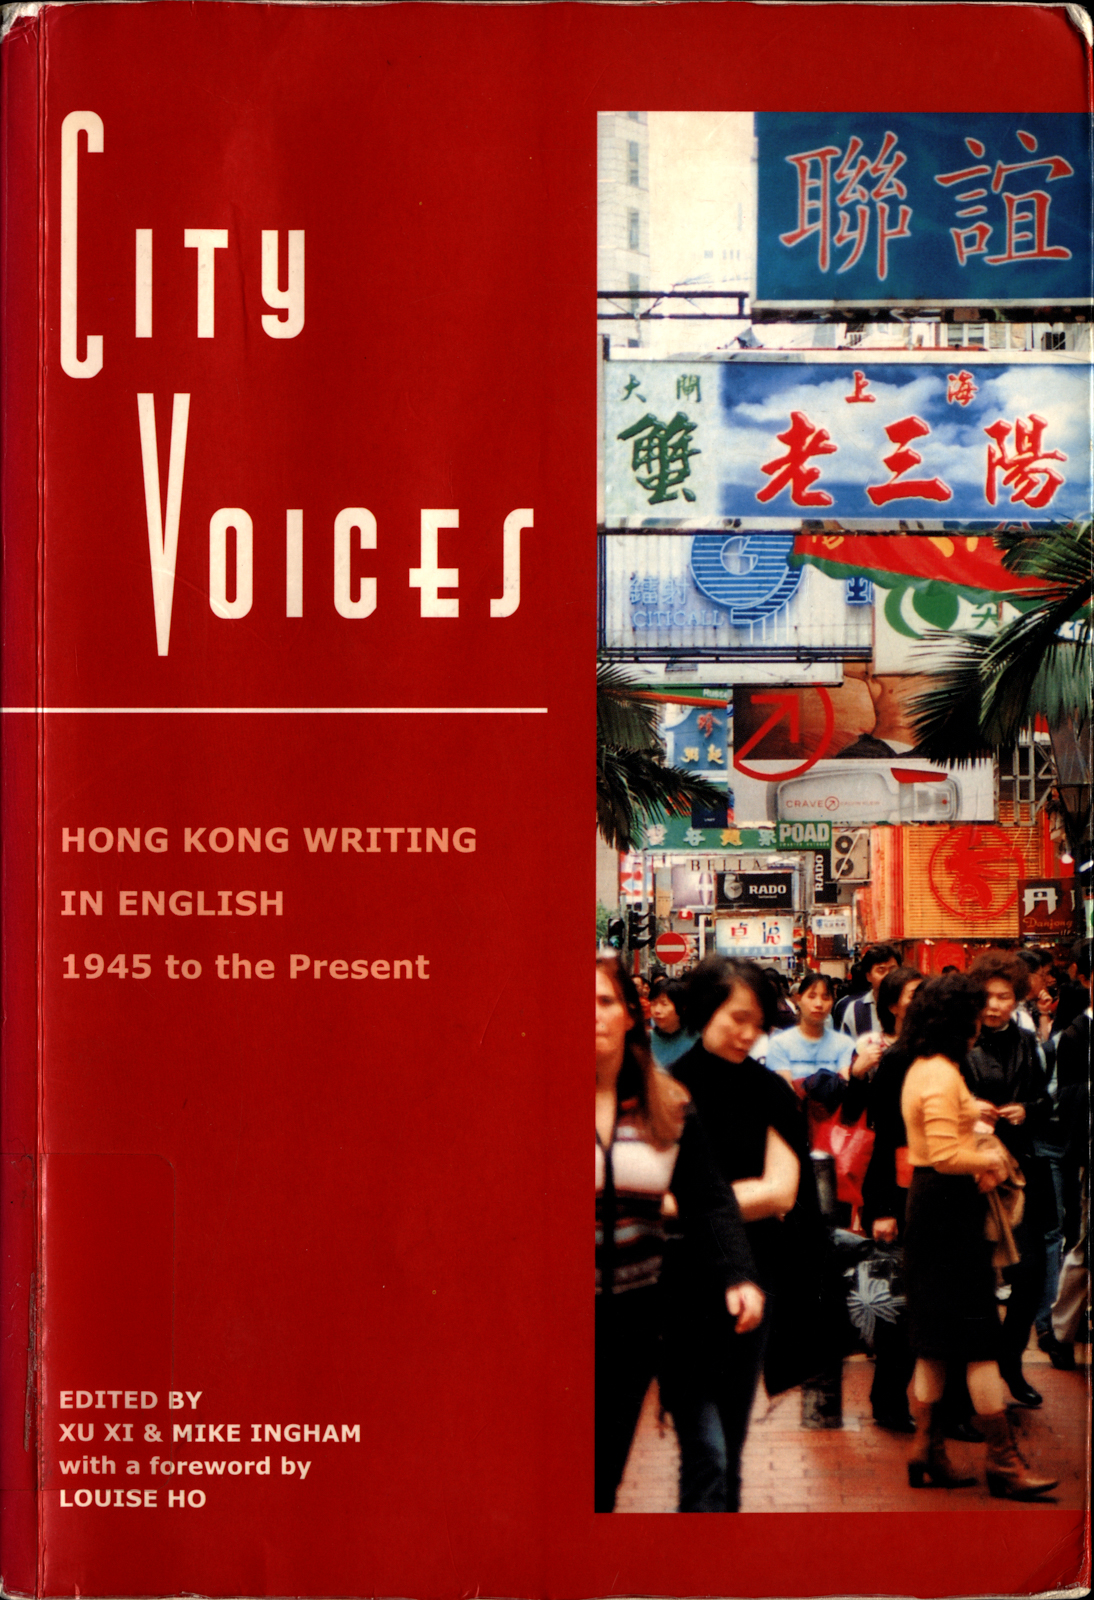 City Voices: Hong Kong Writing in English, 1945 to the Present